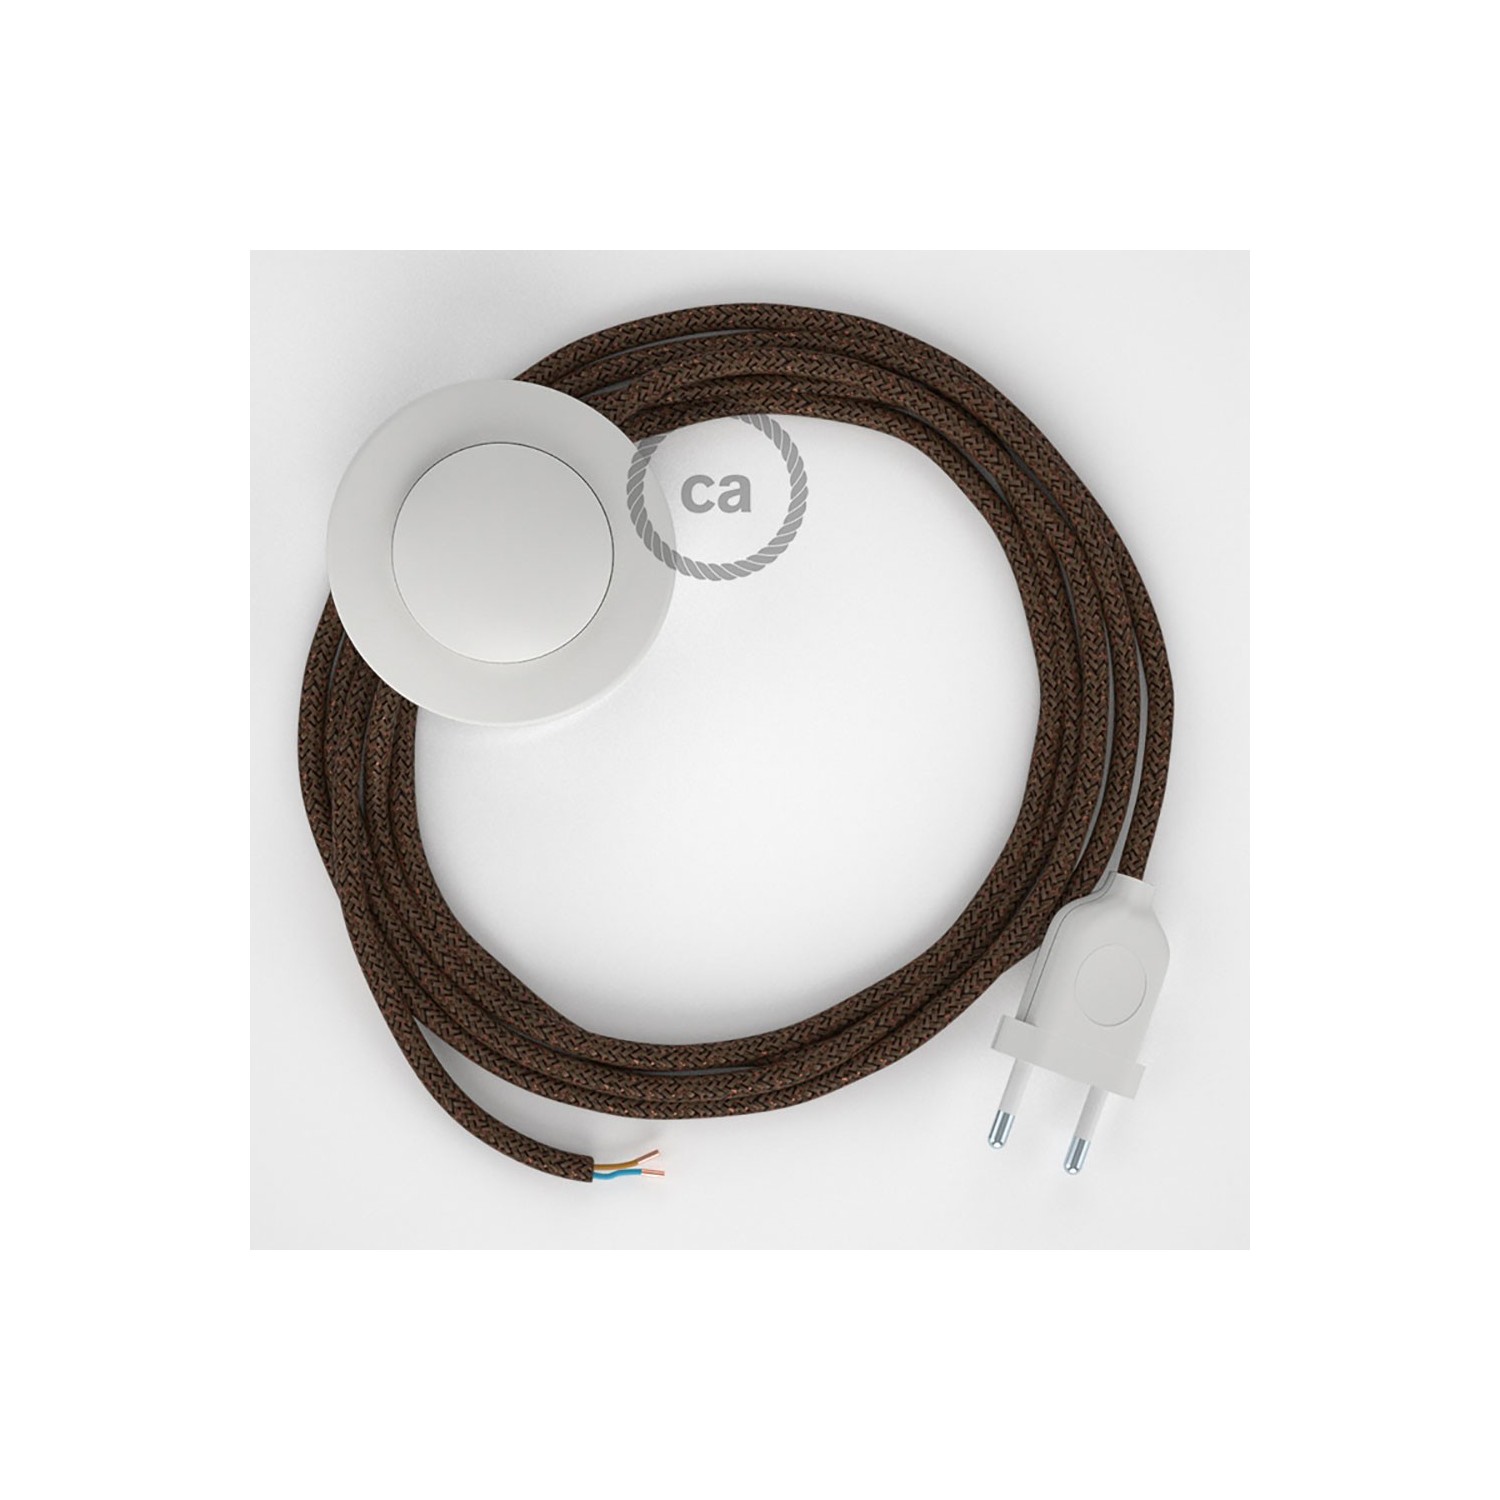 Wiring Pedestal, RL13 Sparkly Brown Rayon 3 m. Choose the colour of the switch and plug.